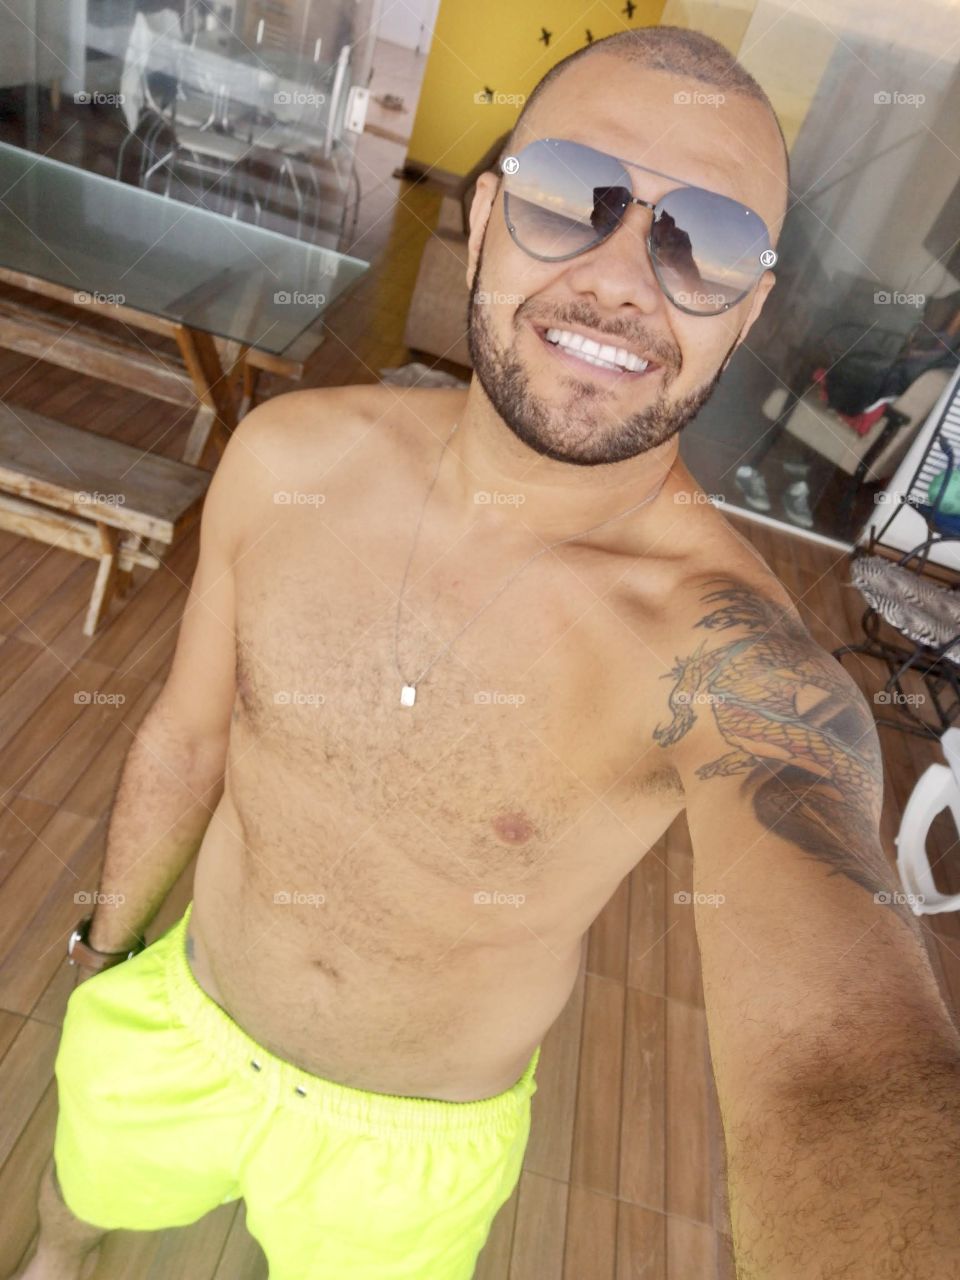 Shirtless man and sunglasses smiling in selfie